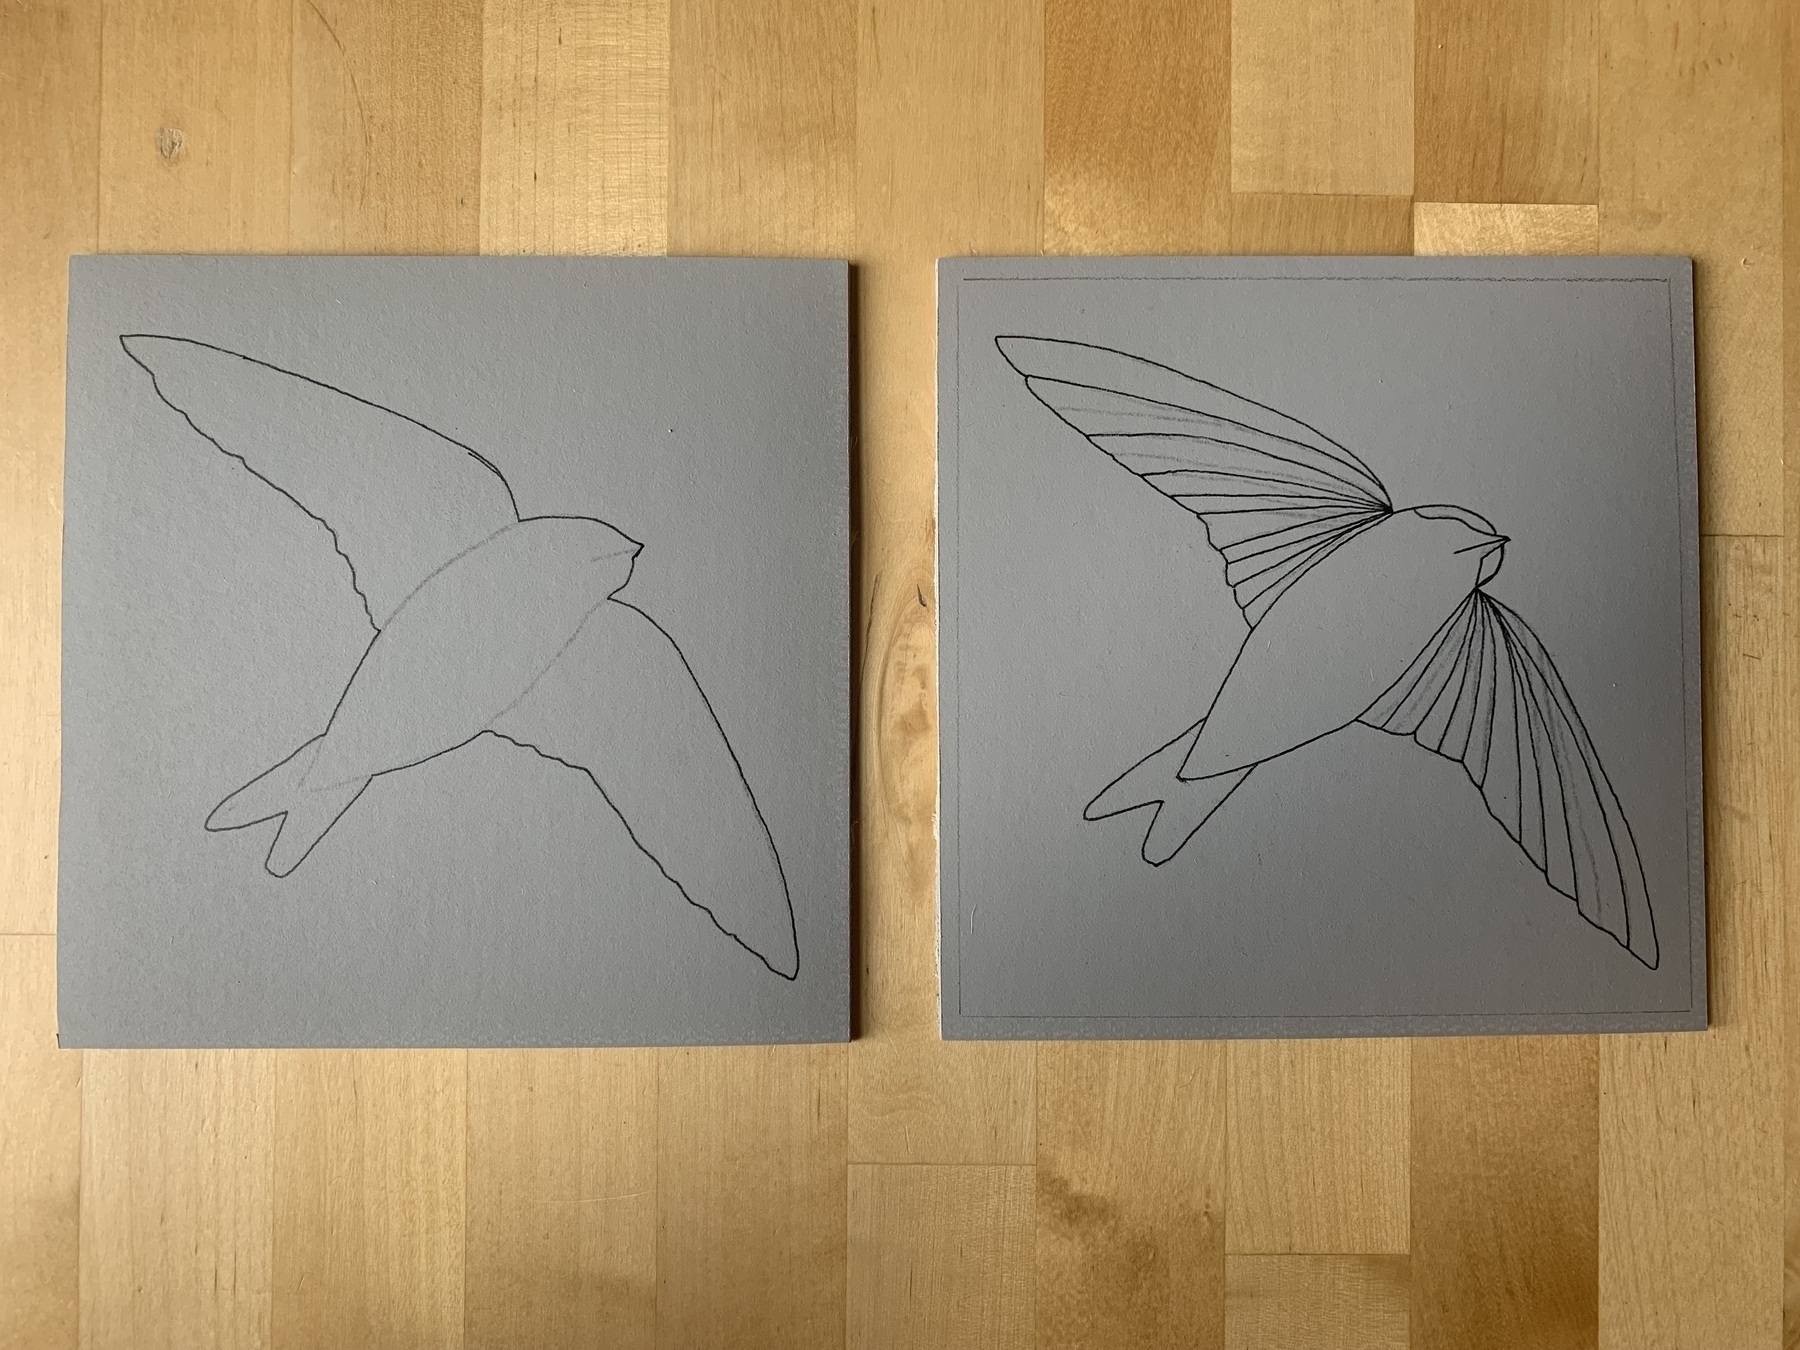 Two squares of lino side by side. Left has outline in black marker of a house martin in flight with wings spread. Right is identical outline of the bird with additional detail on the wings.